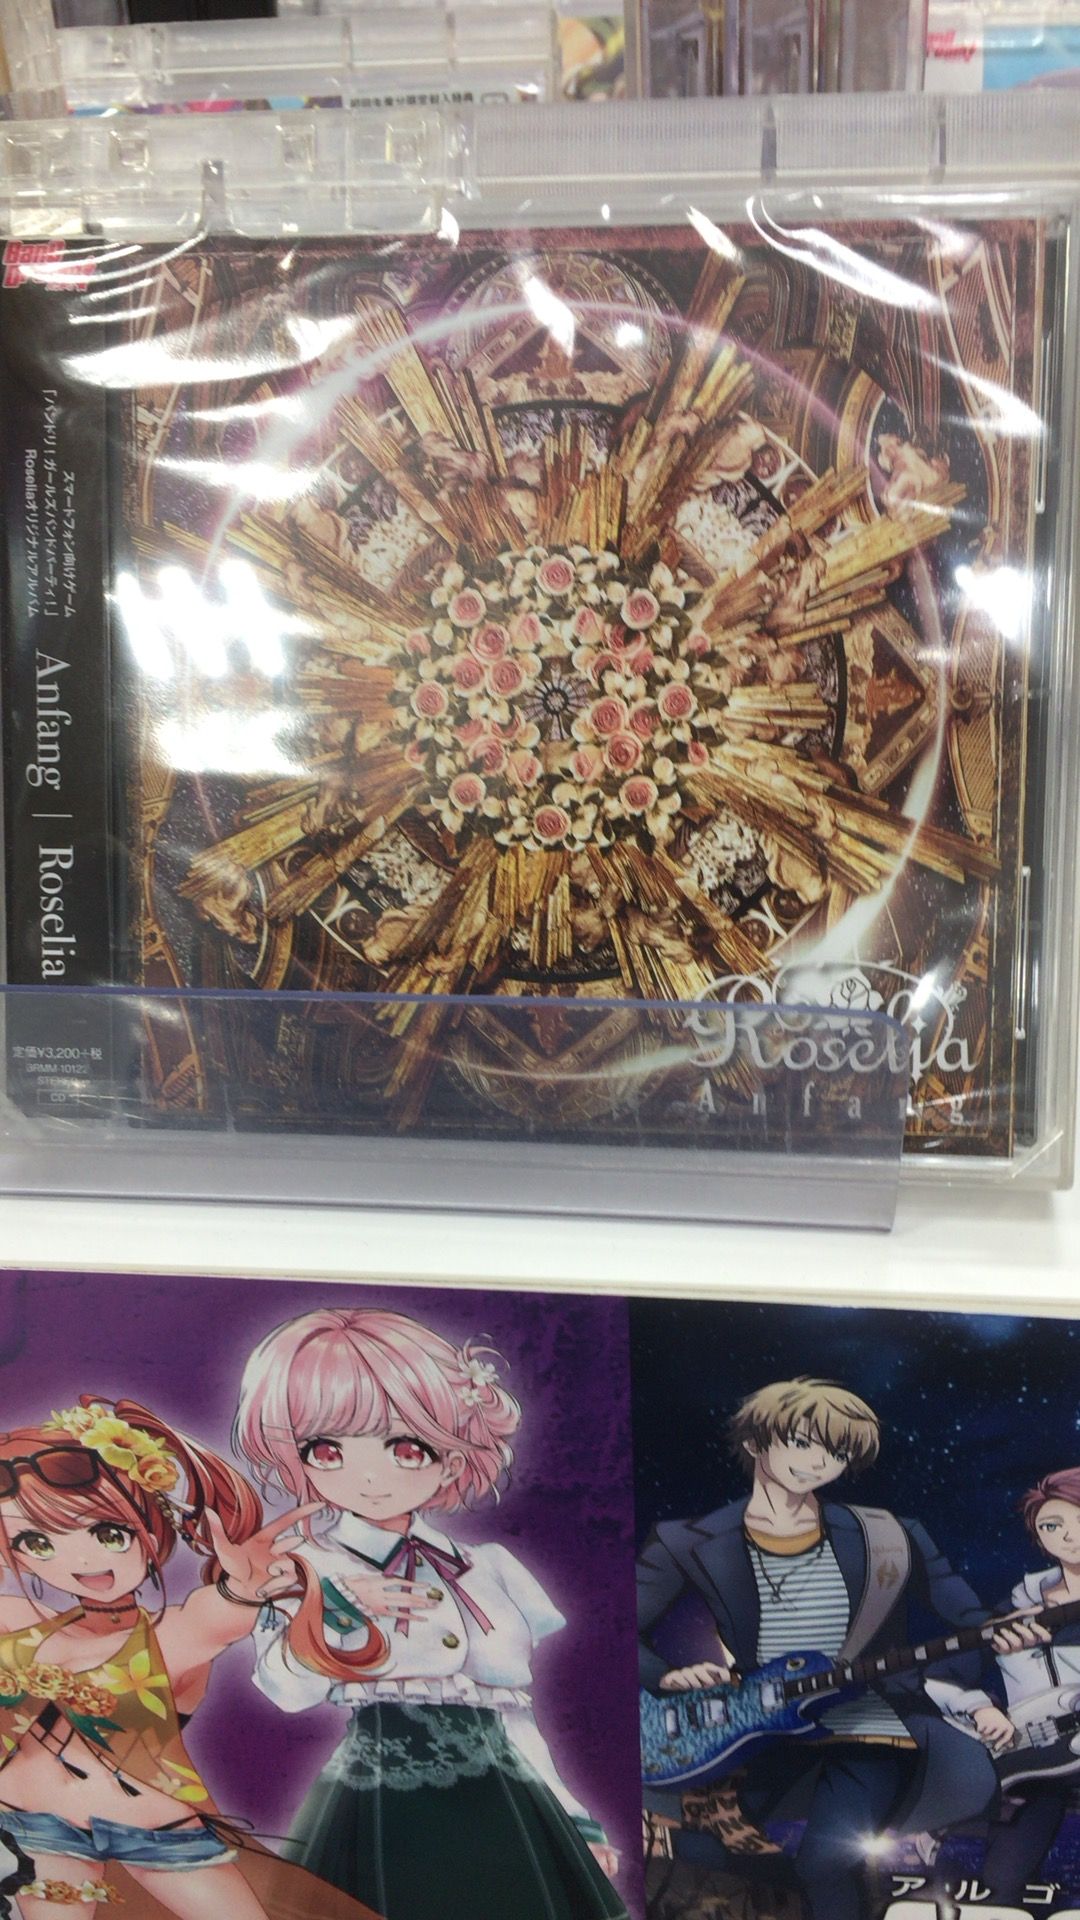 This is an offer made on the Request: Roselia - Anfang (CD Album)